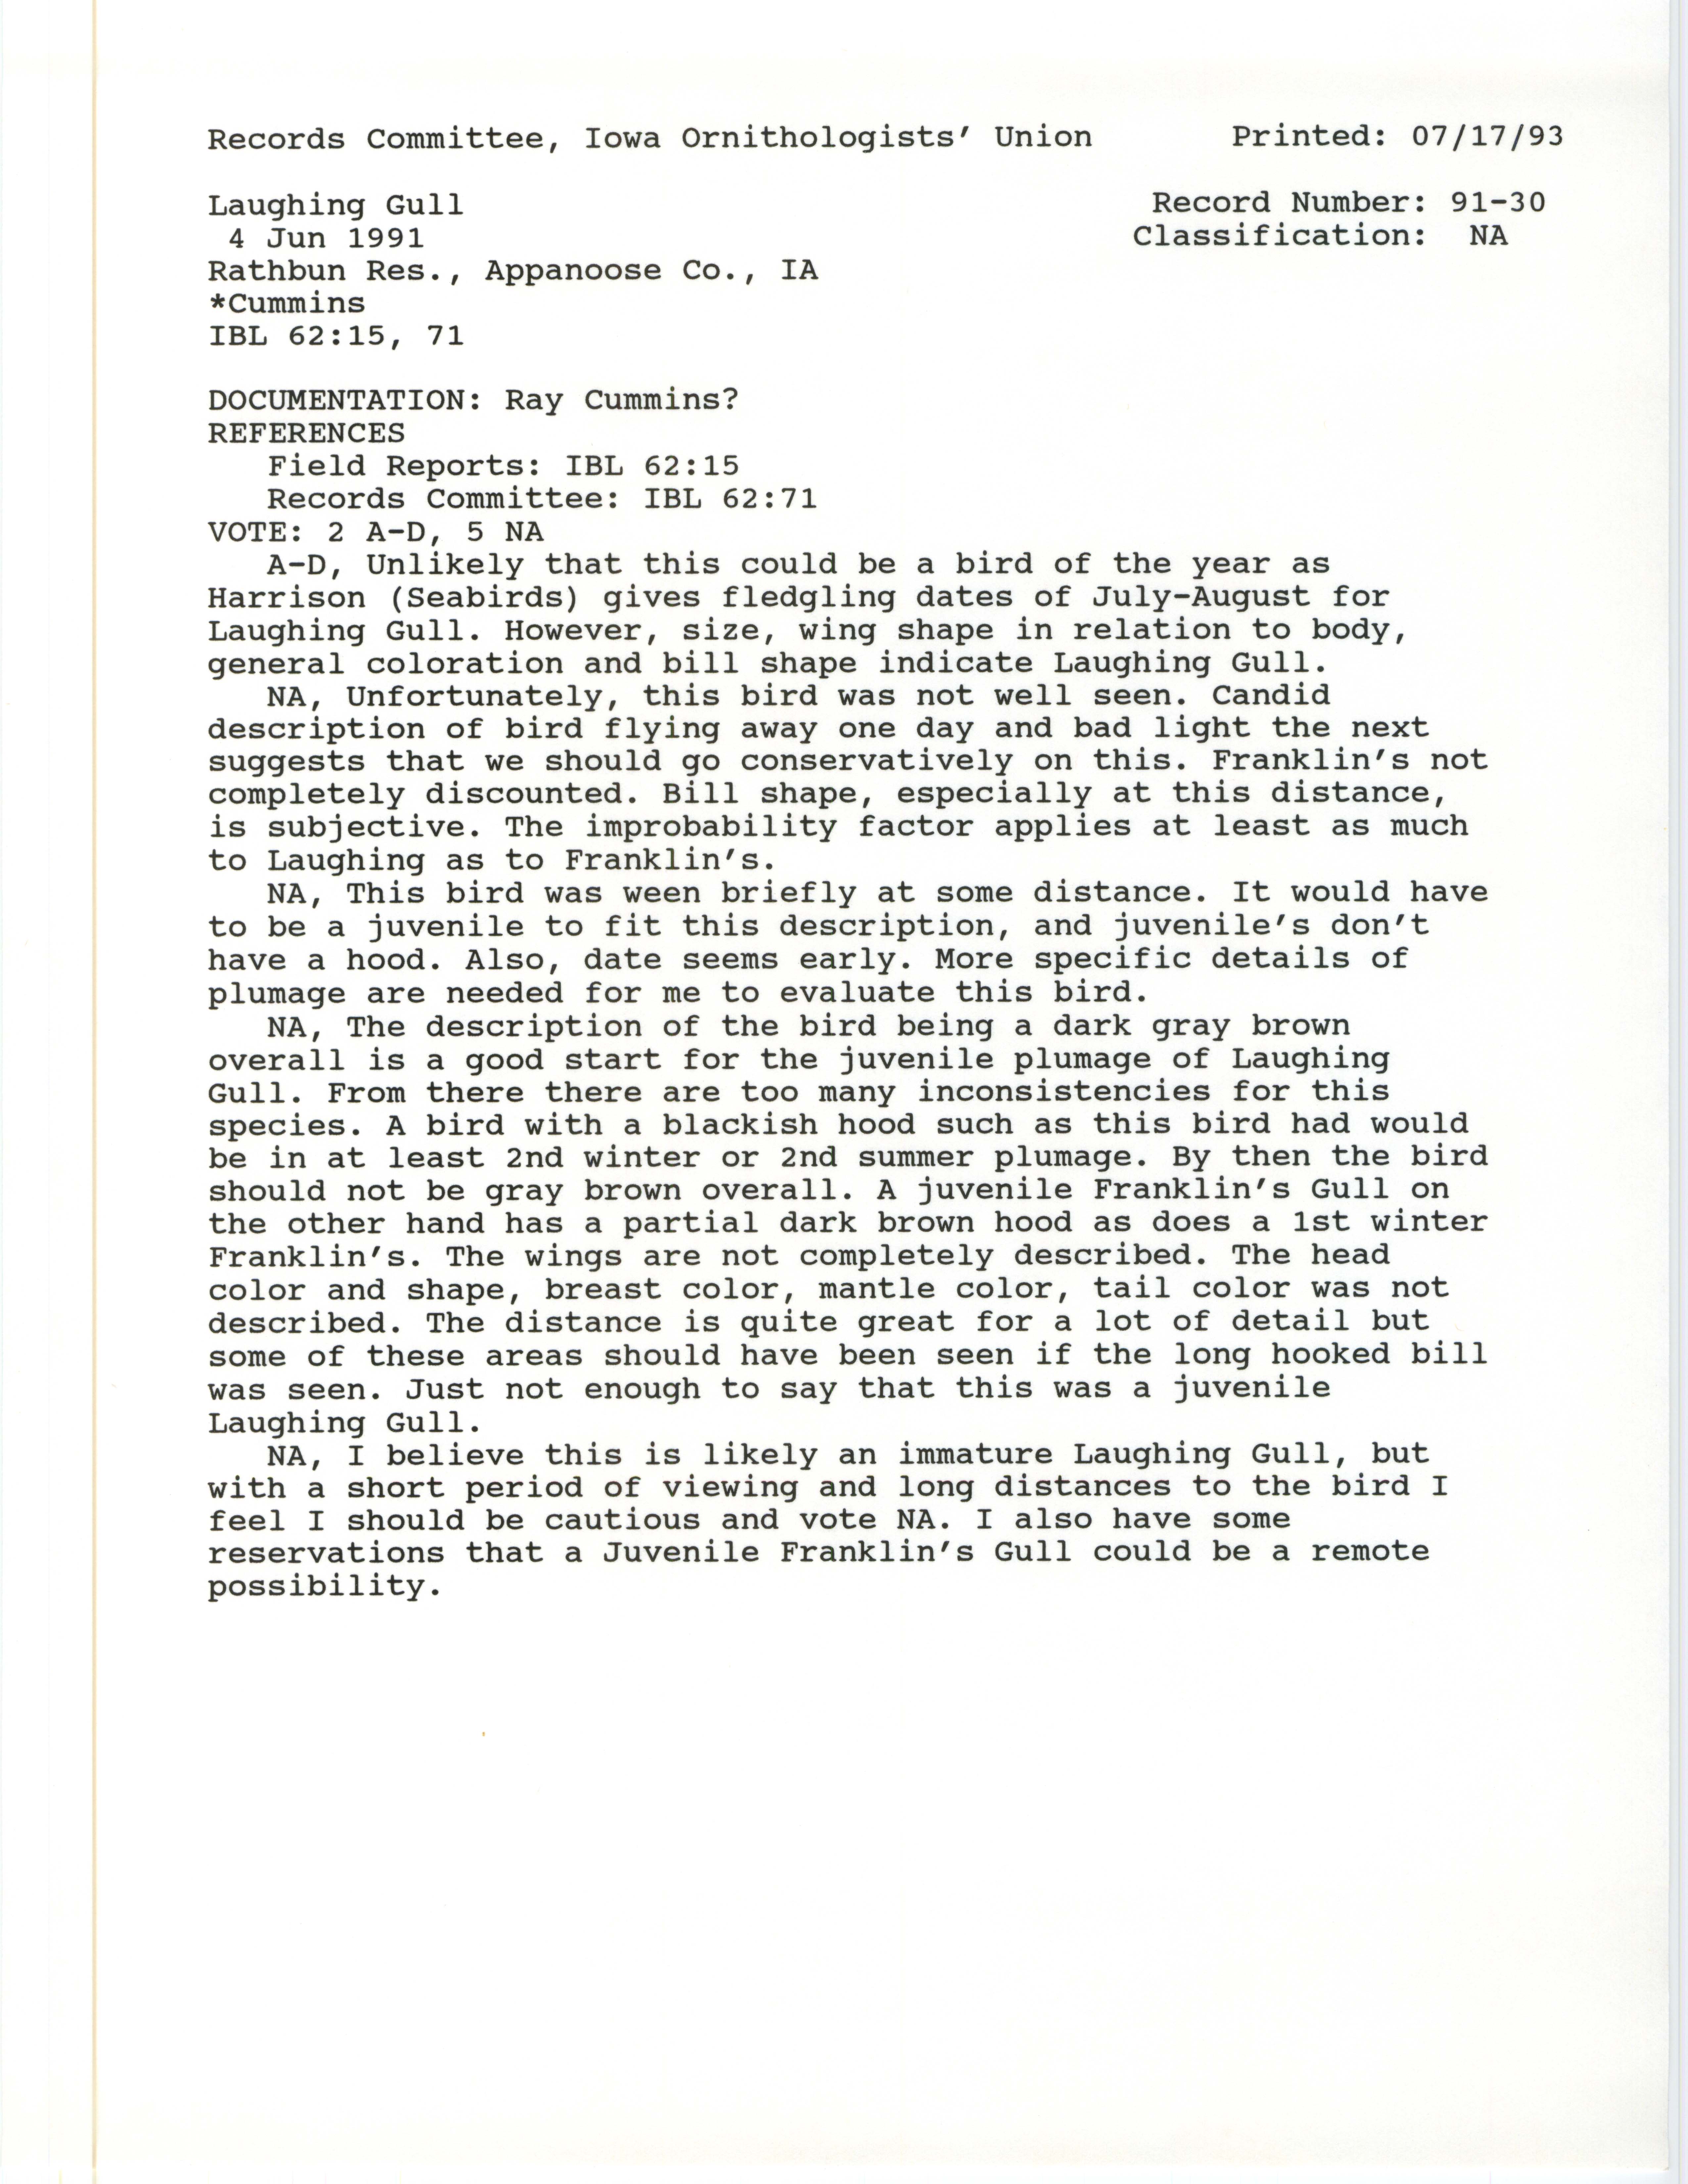 Records Committee review for rare bird sighting of Laughing Gull at Lake Rathbun, 1991